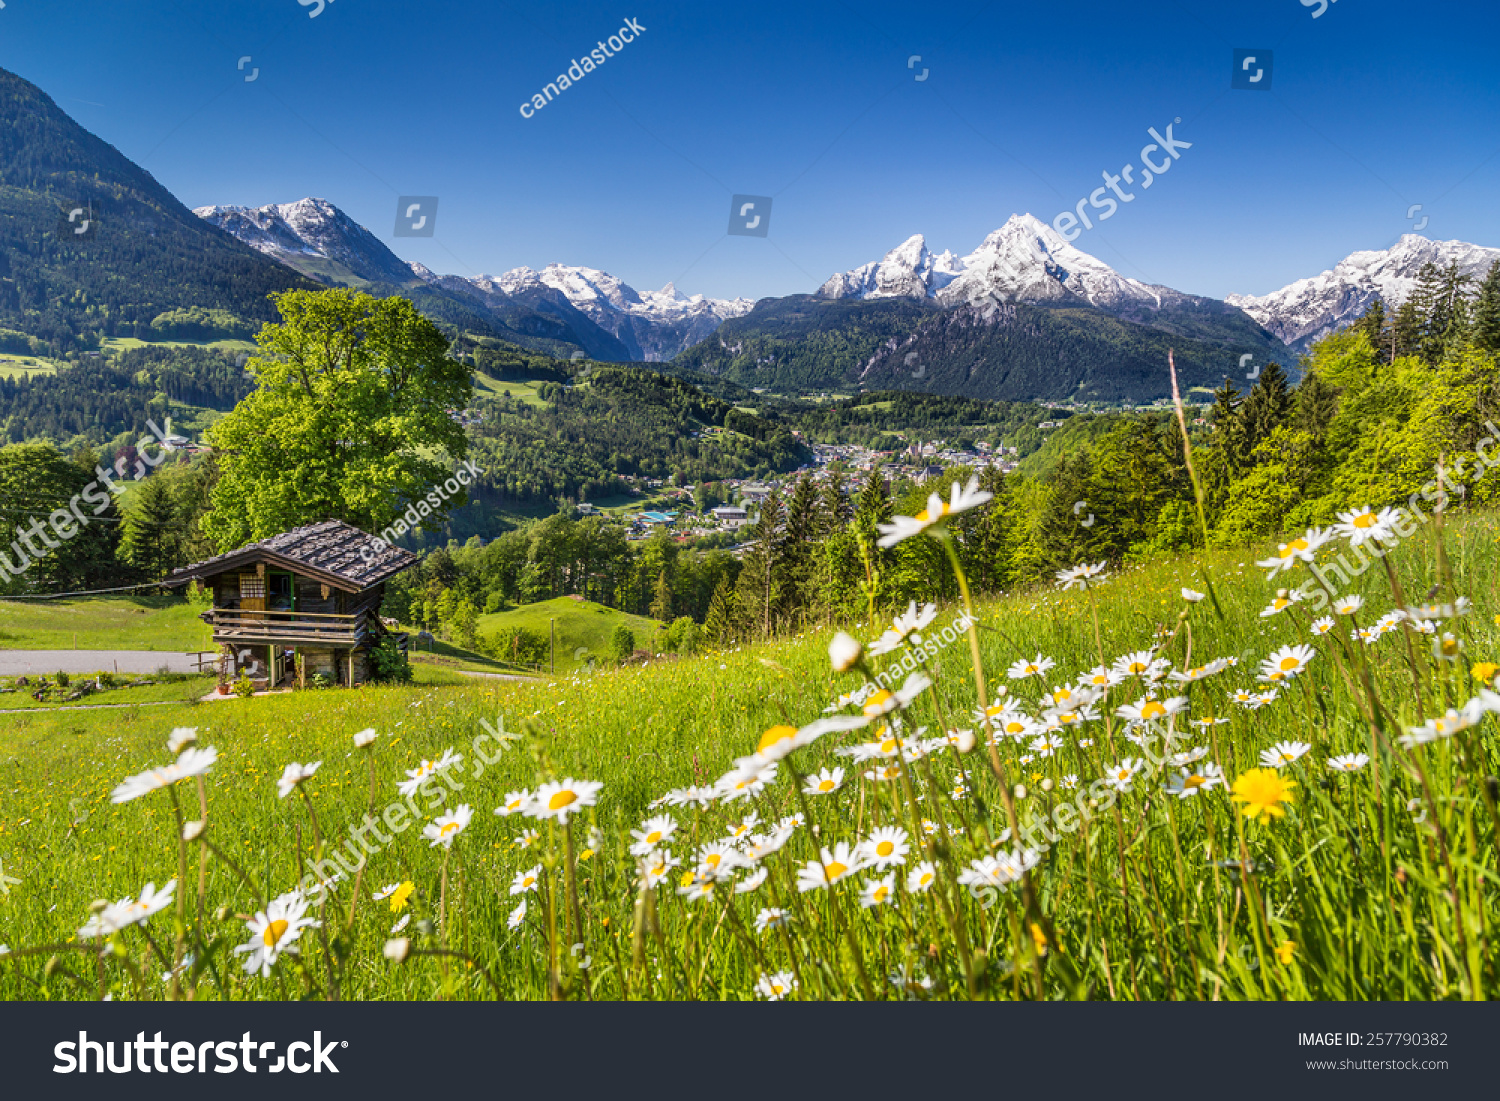 Beautiful mountain landscape in the Bavarian Alps with village of Berchtesgaden and Watzmann massif in the background at sunrise, Nationalpark Berchtesgadener Land, Bavaria, Germany #257790382